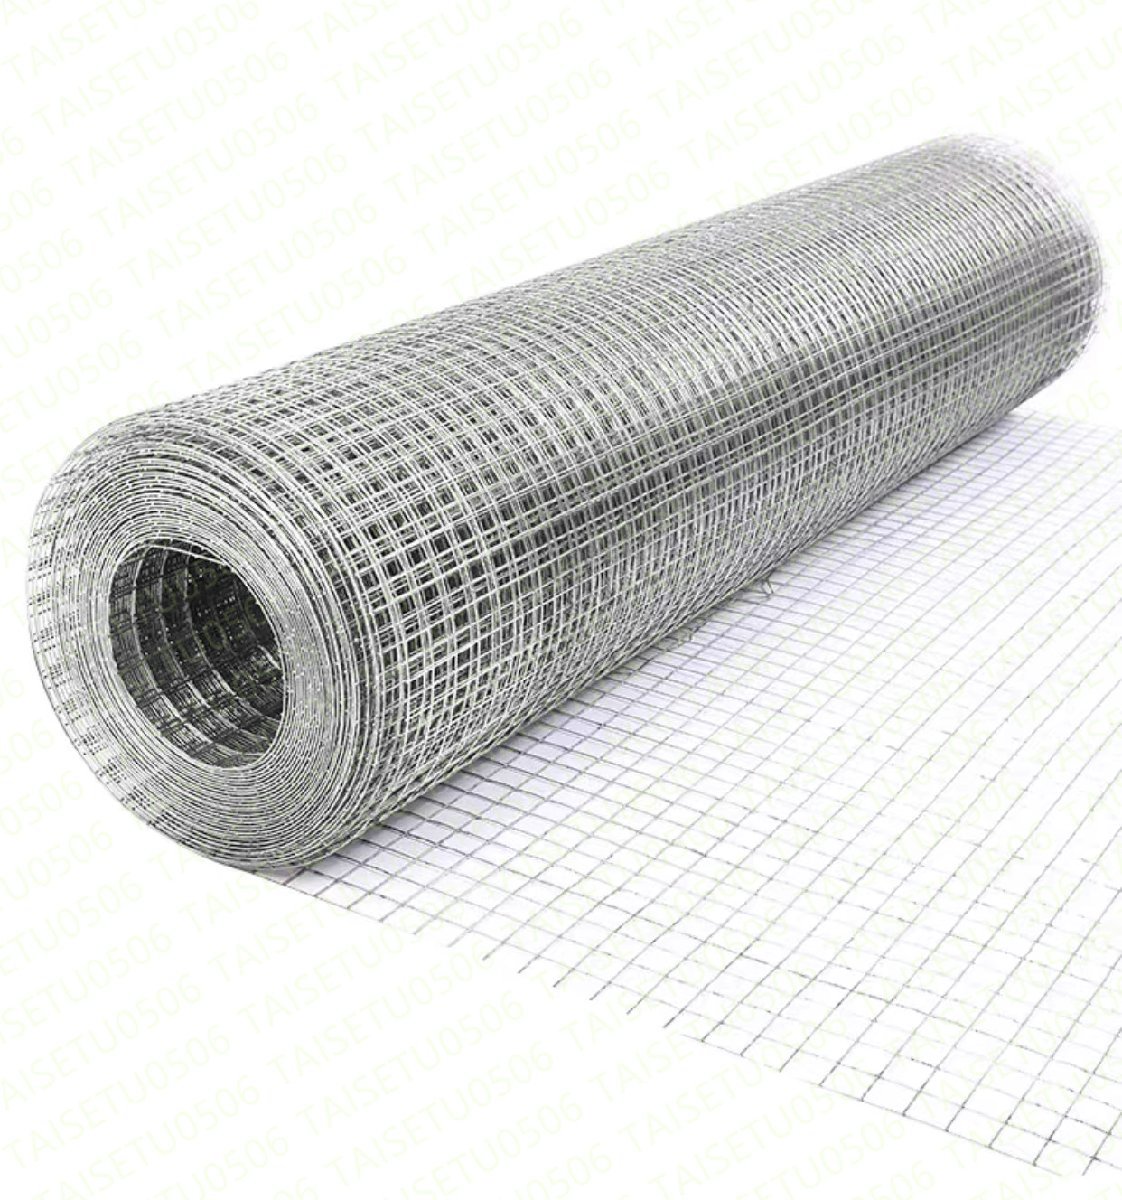  attention new work *.. zinc ... wire‐netting protection ... prevent balcony home use 18M